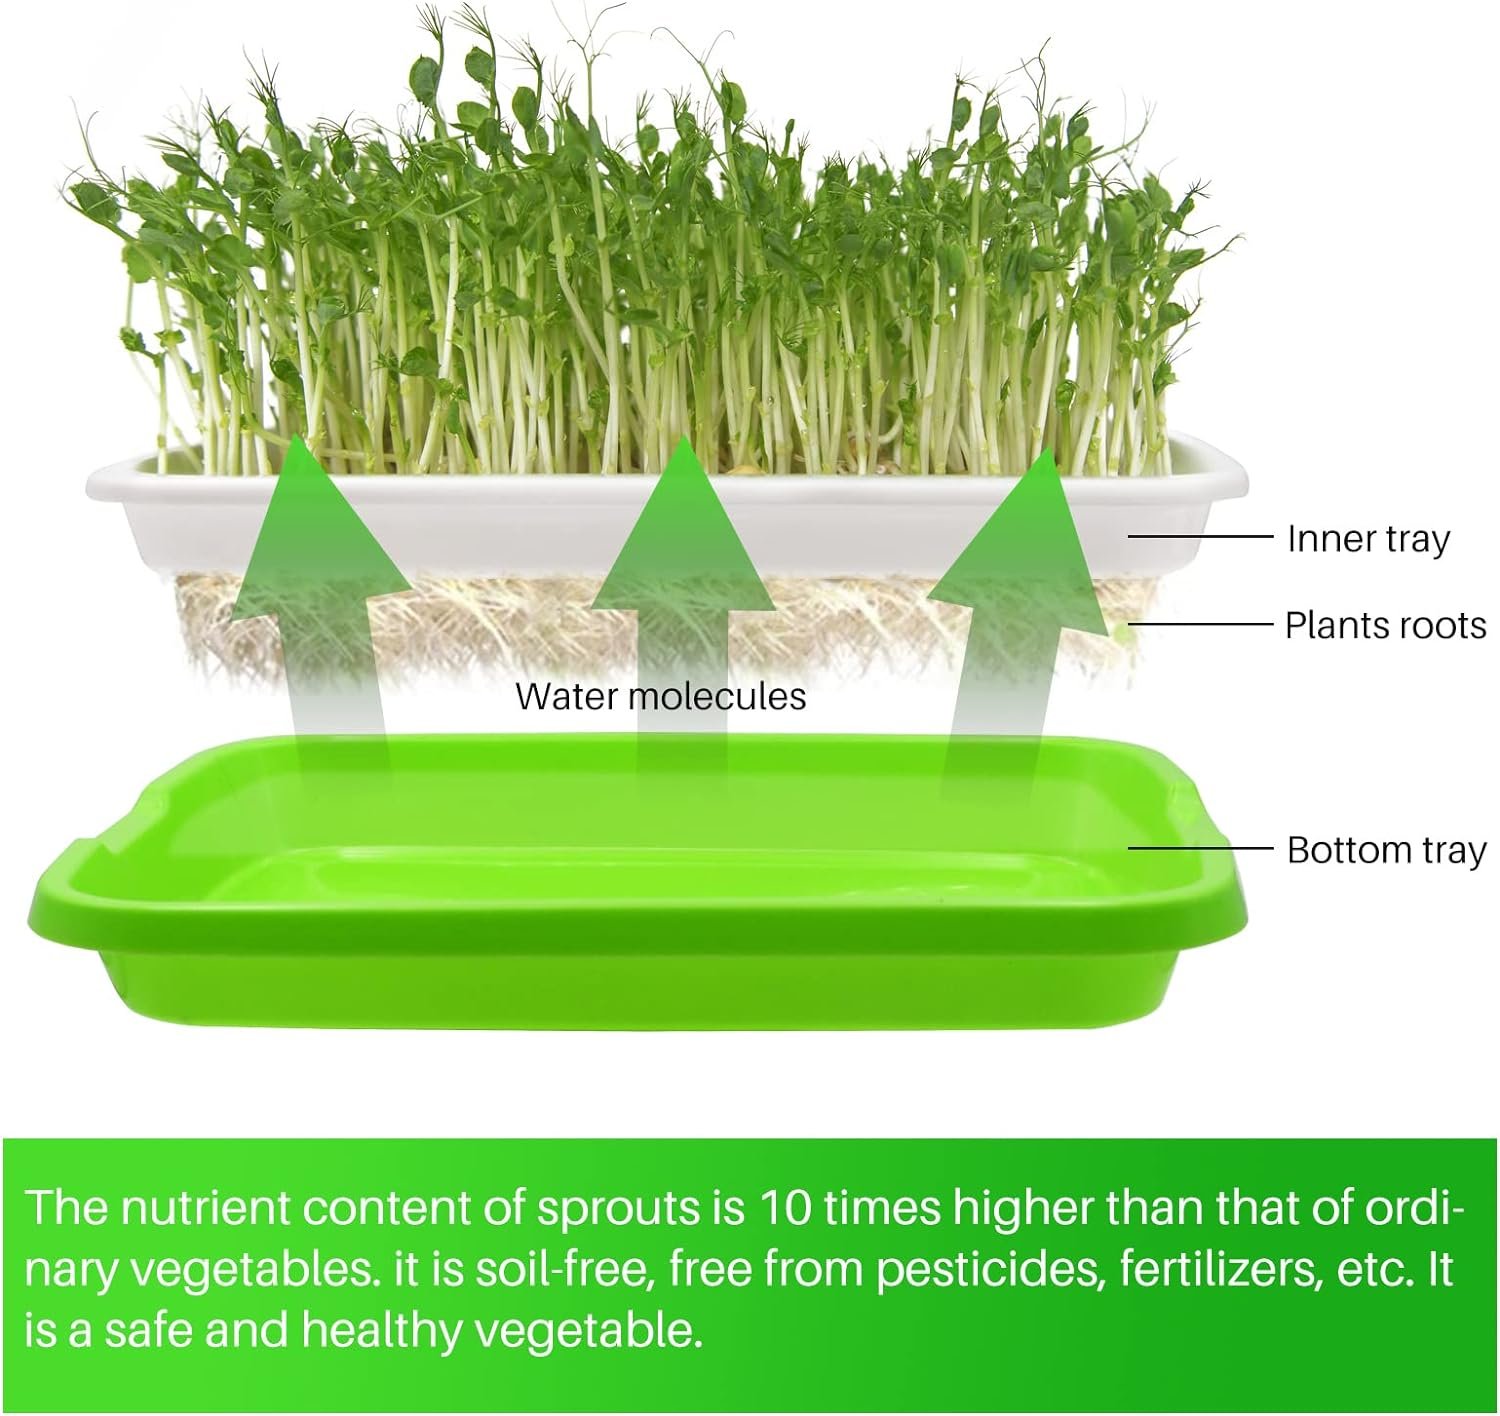 Junniu 8-Pack Seed Sprouter Tray Soil-Free Wheatgrass Beans Seeds Grower and Storage Trays BPA Free Nursery Tray Seed Germination Tray for Gardening Indoor